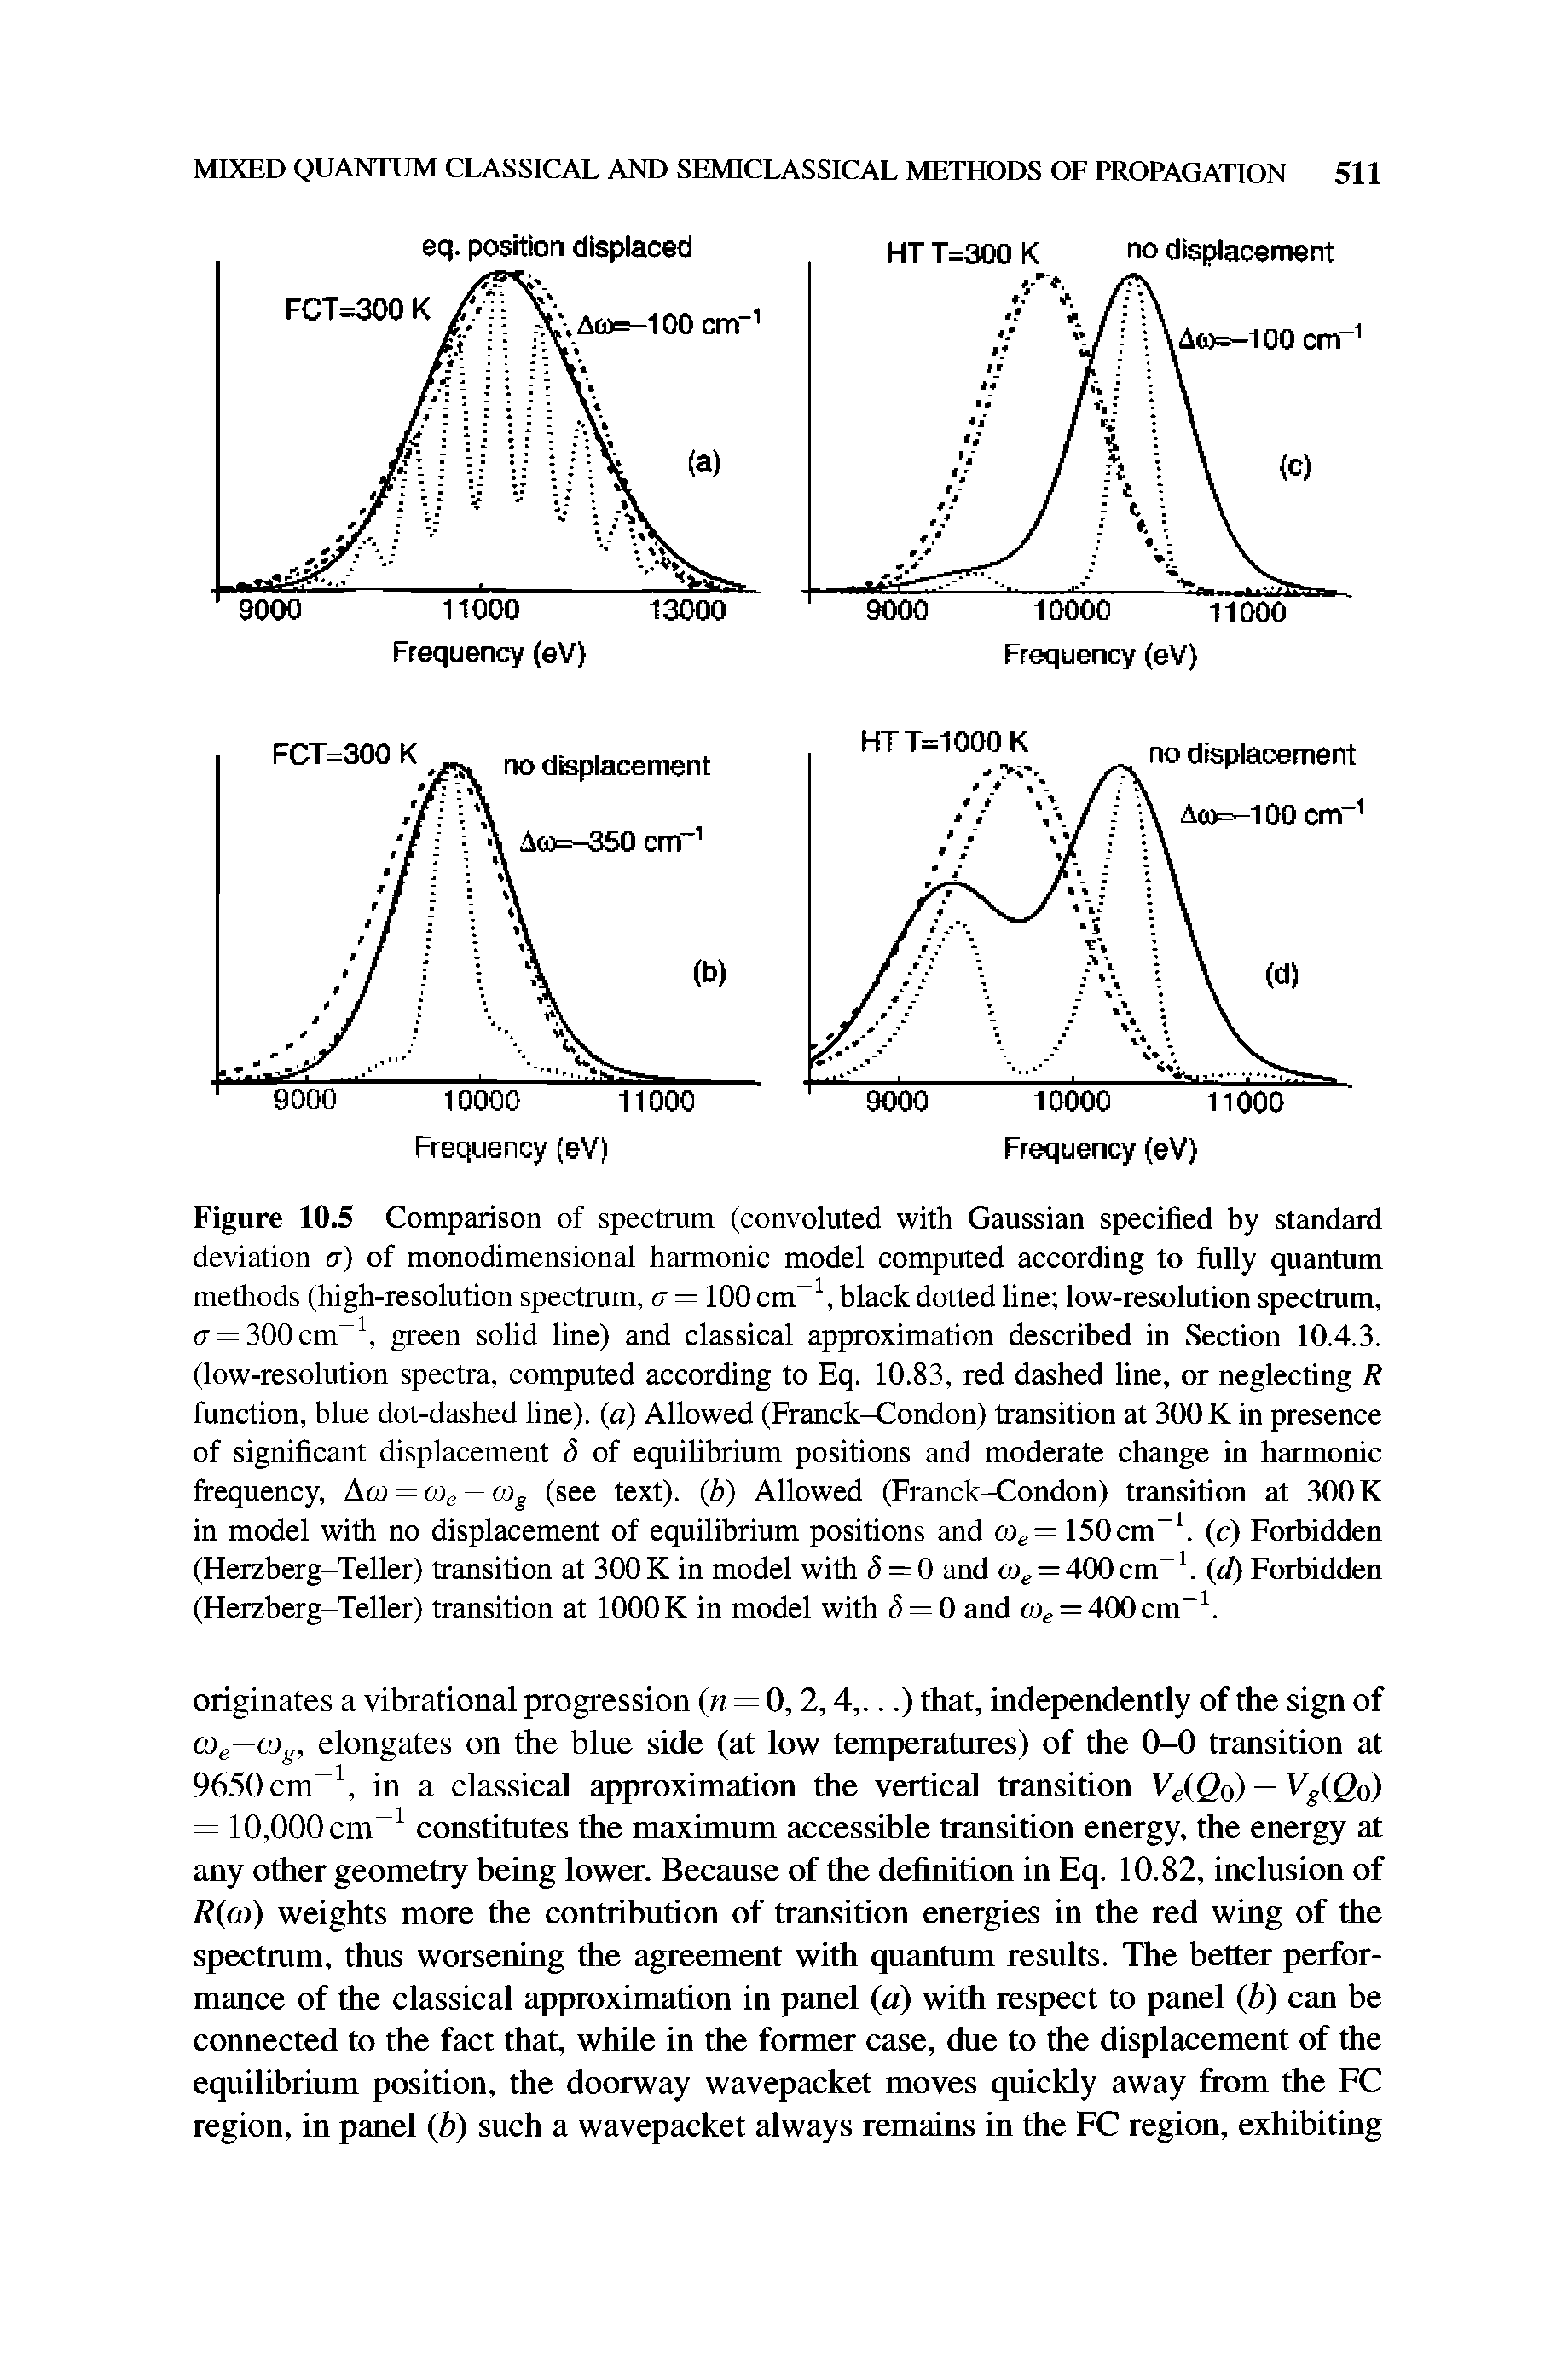 Figure 10.5 Comparison of spectrum (convoluted with Gaussian specified by standard deviation ) of monodimensional harmonic model computed according to fully quantum methods (high-resolution spectrum, c = 100 cm , black dotted fine low-resolution spectrum, cr = 300cm , green solid line) and classical approximation described in Section 10.4.3. (low-resolution spectra, computed according to Eq. 10.83, red dashed line, or neglecting R function, blue dot-dashed line), (a) Allowed (Franck-Condon) transition at 300 K in presence of significant displacement 5 of equihbrium positions and moderate change in harmonic...